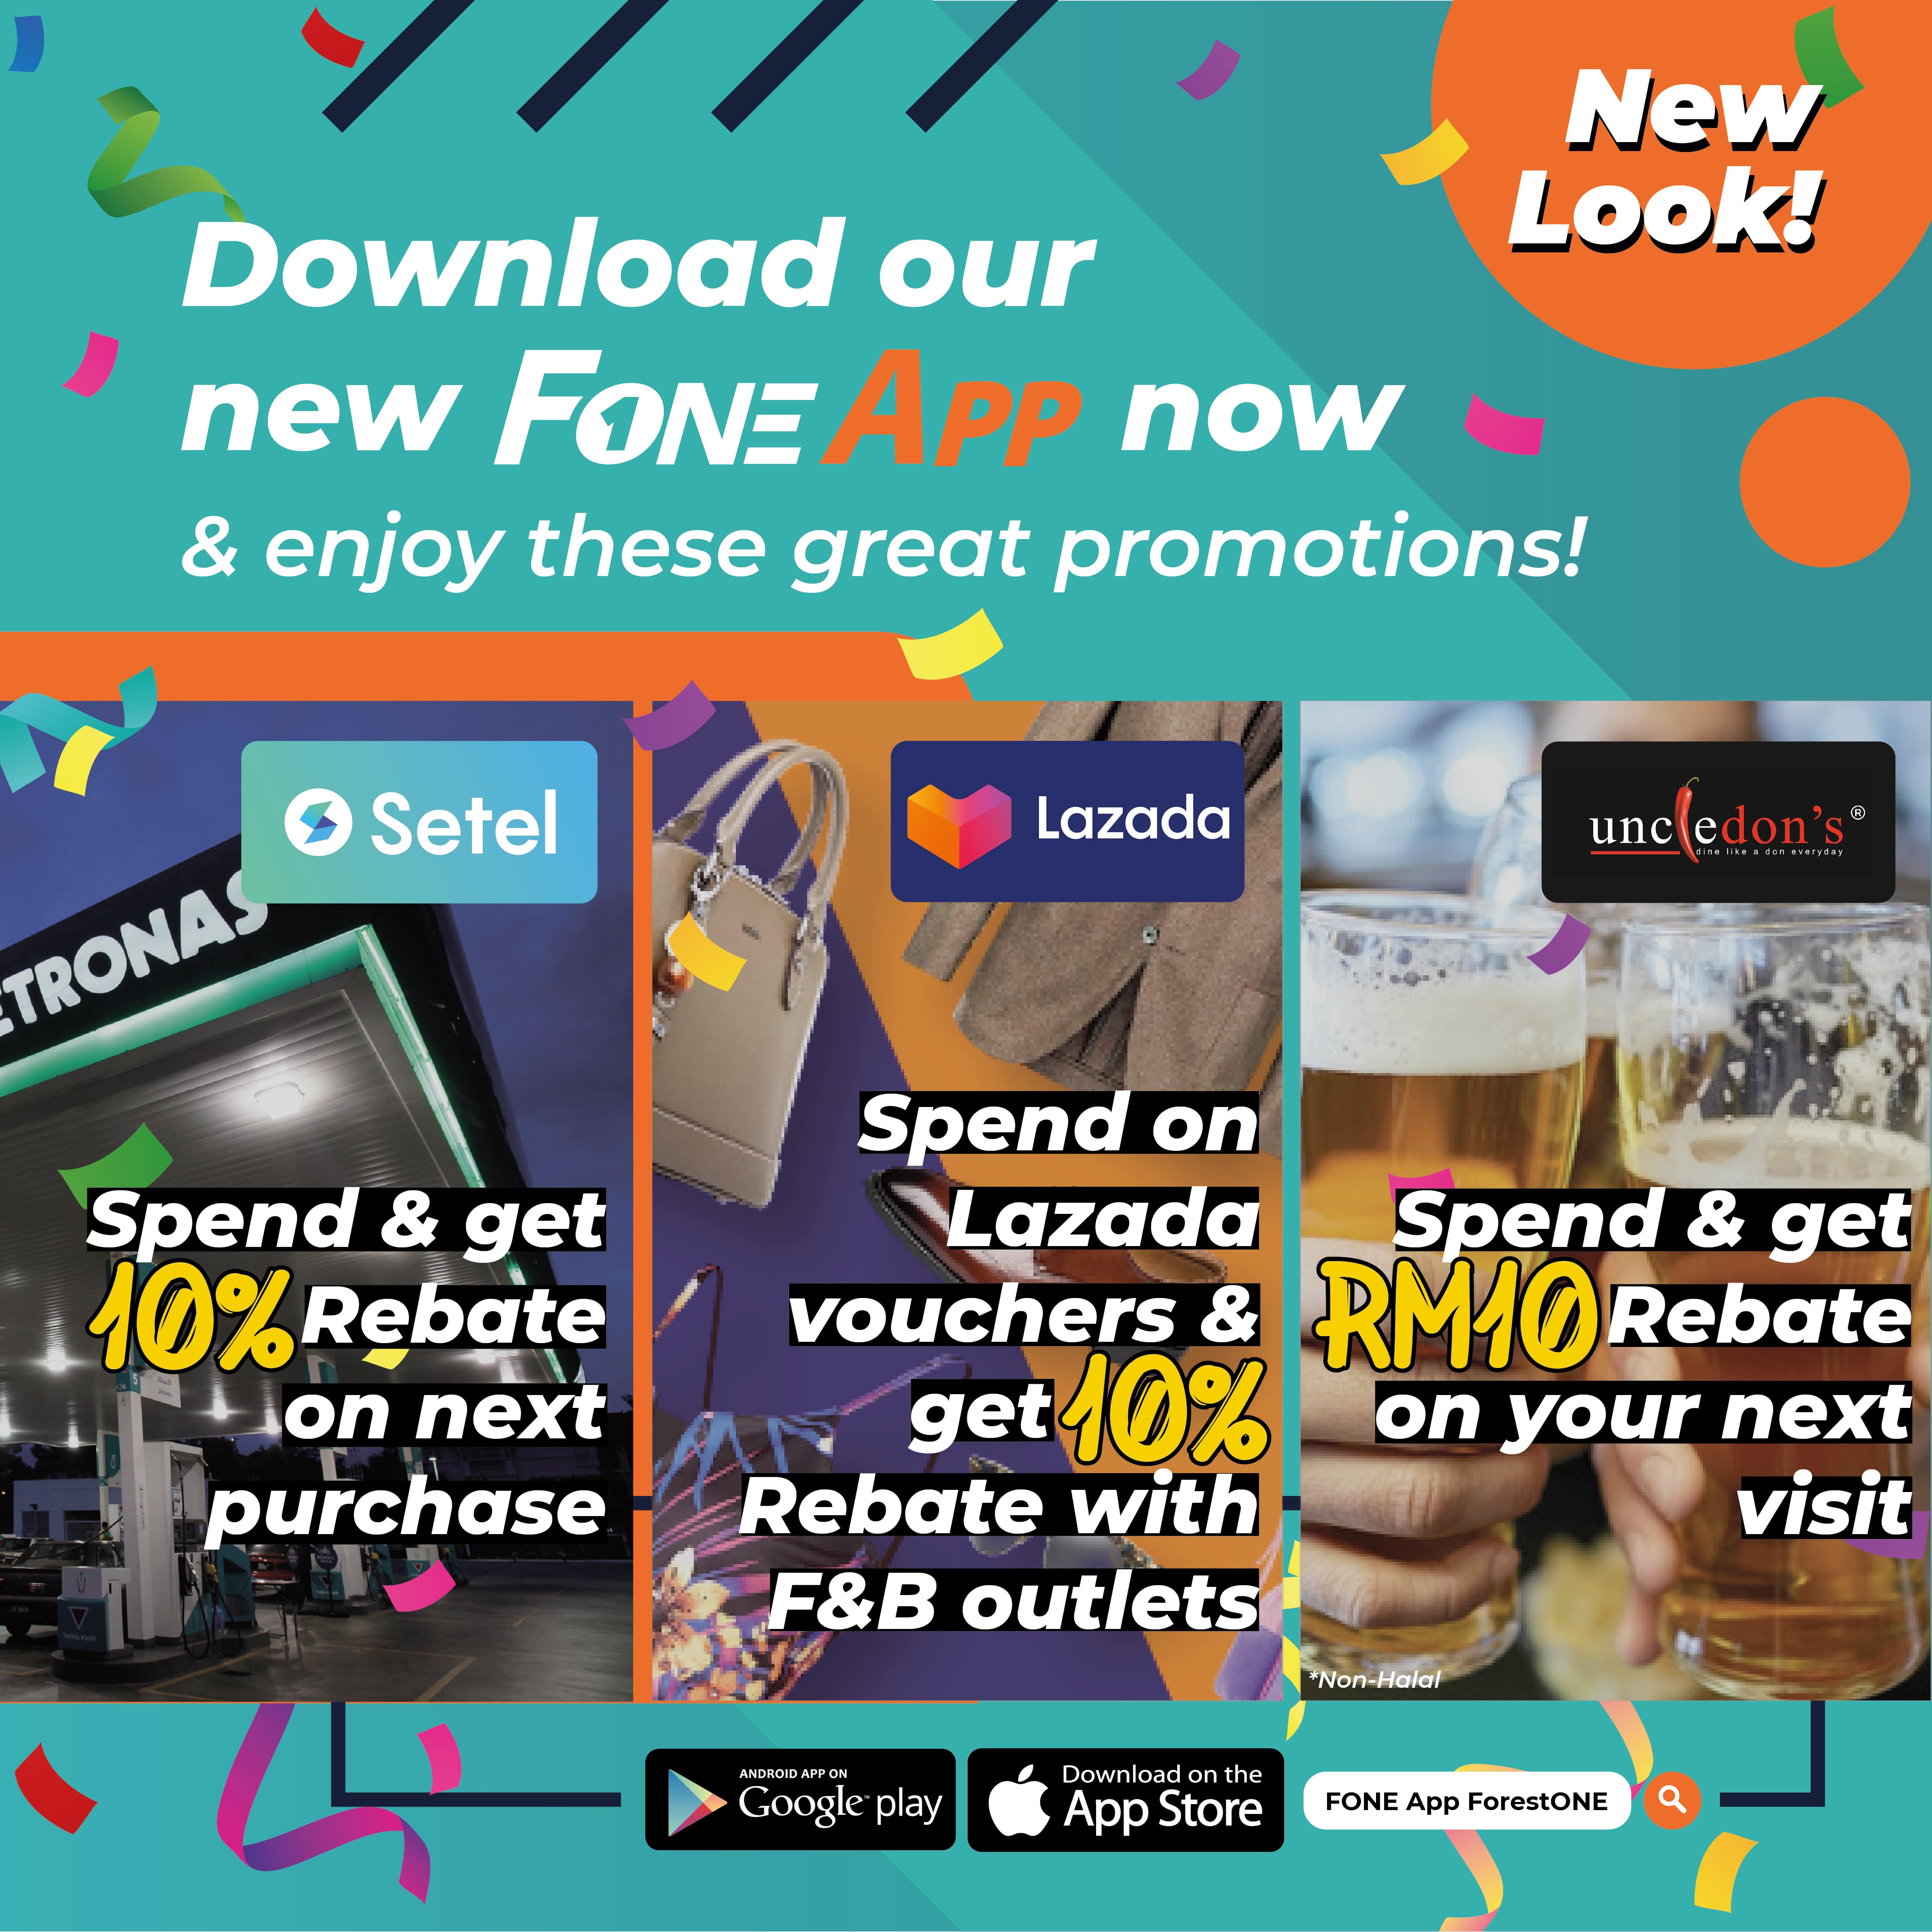 Download the new FONE App & enjoy these promos!